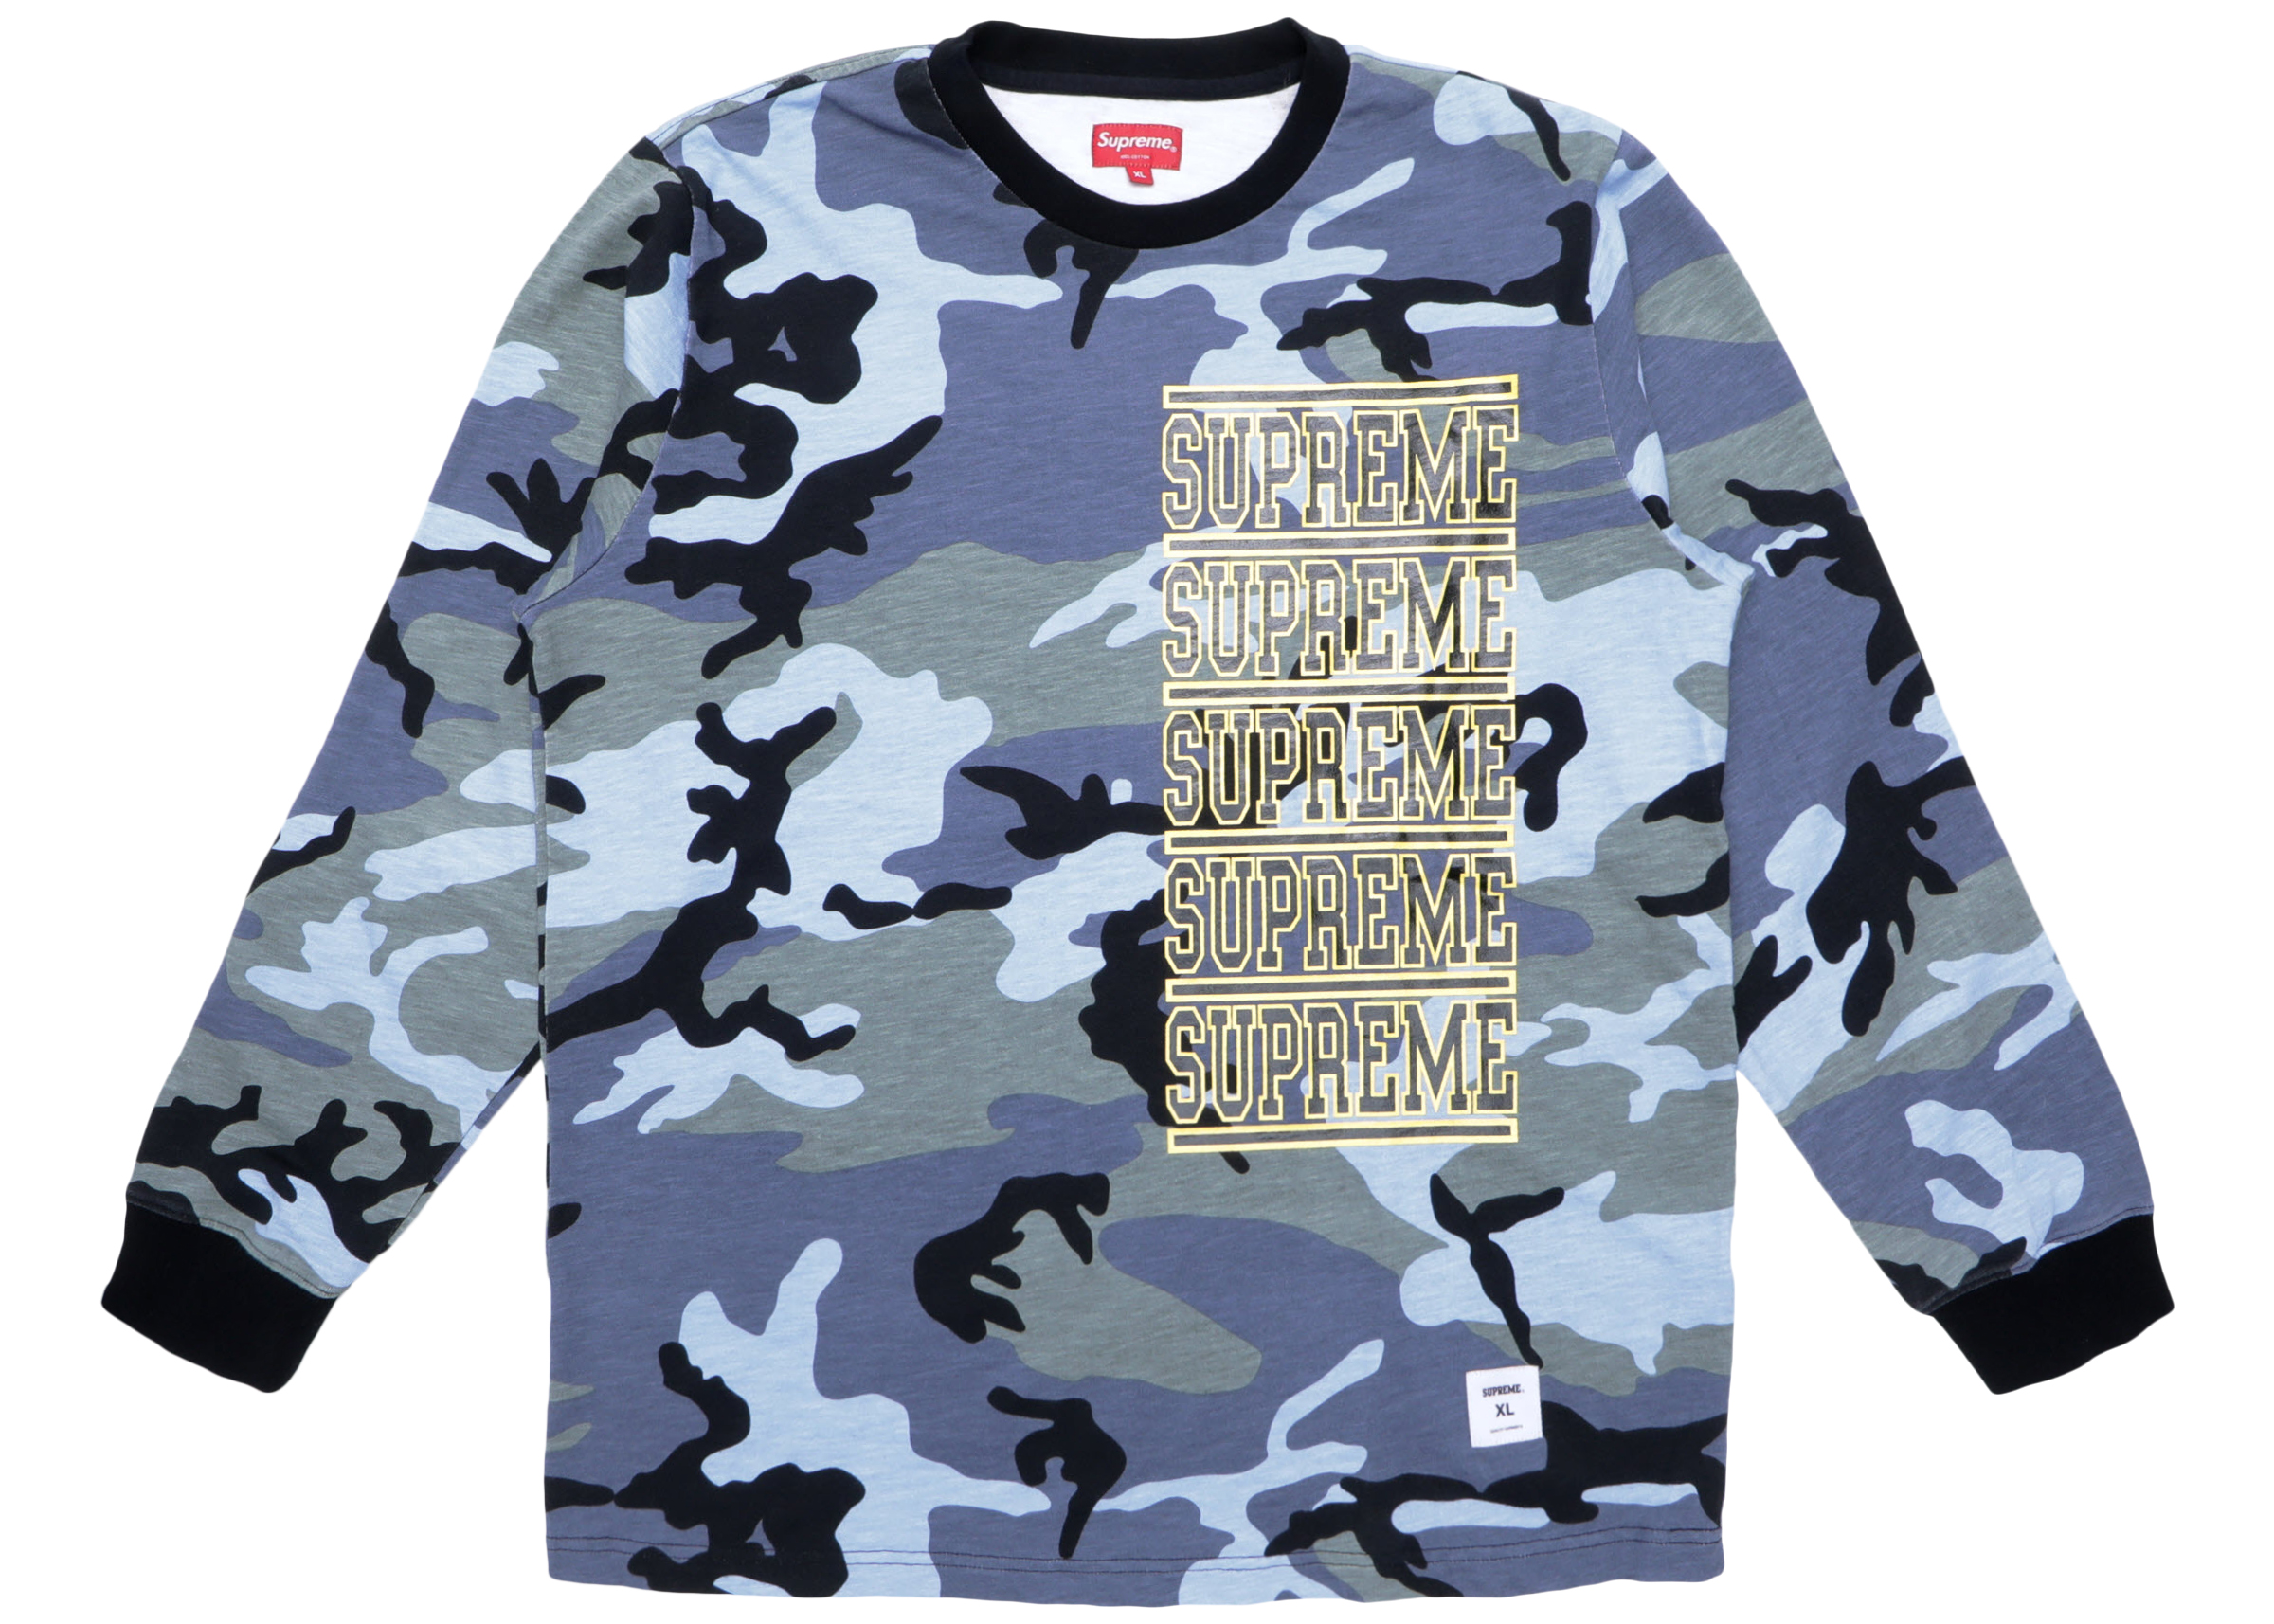 Supreme Stacked L/S Top Blue Camo - SS18 メンズ - JP